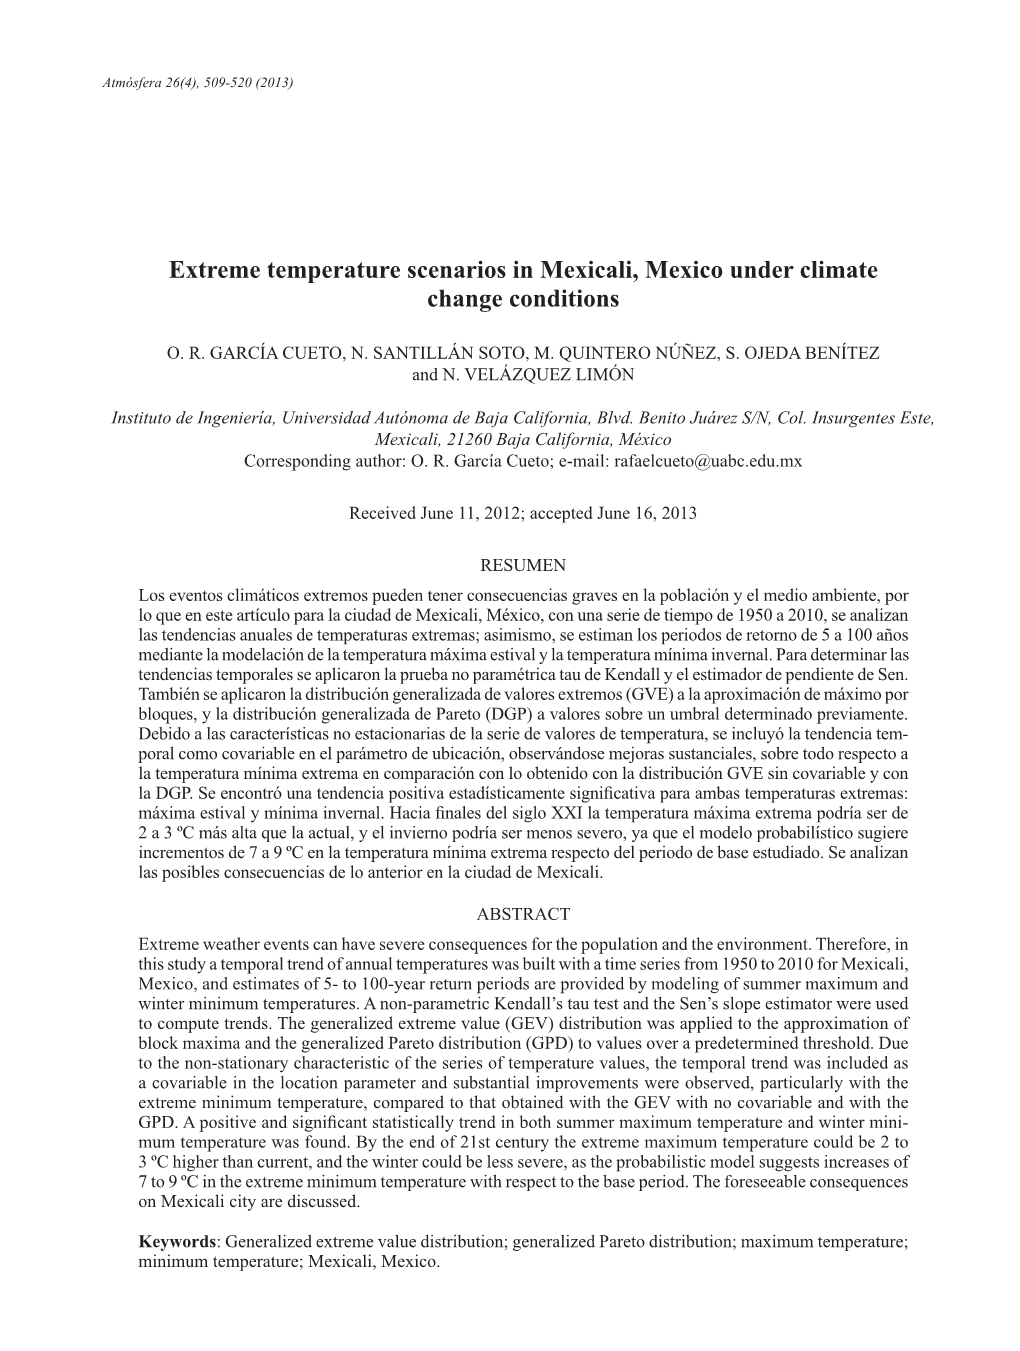 Extreme Temperature Scenarios in Mexicali, Mexico Under Climate Change Conditions